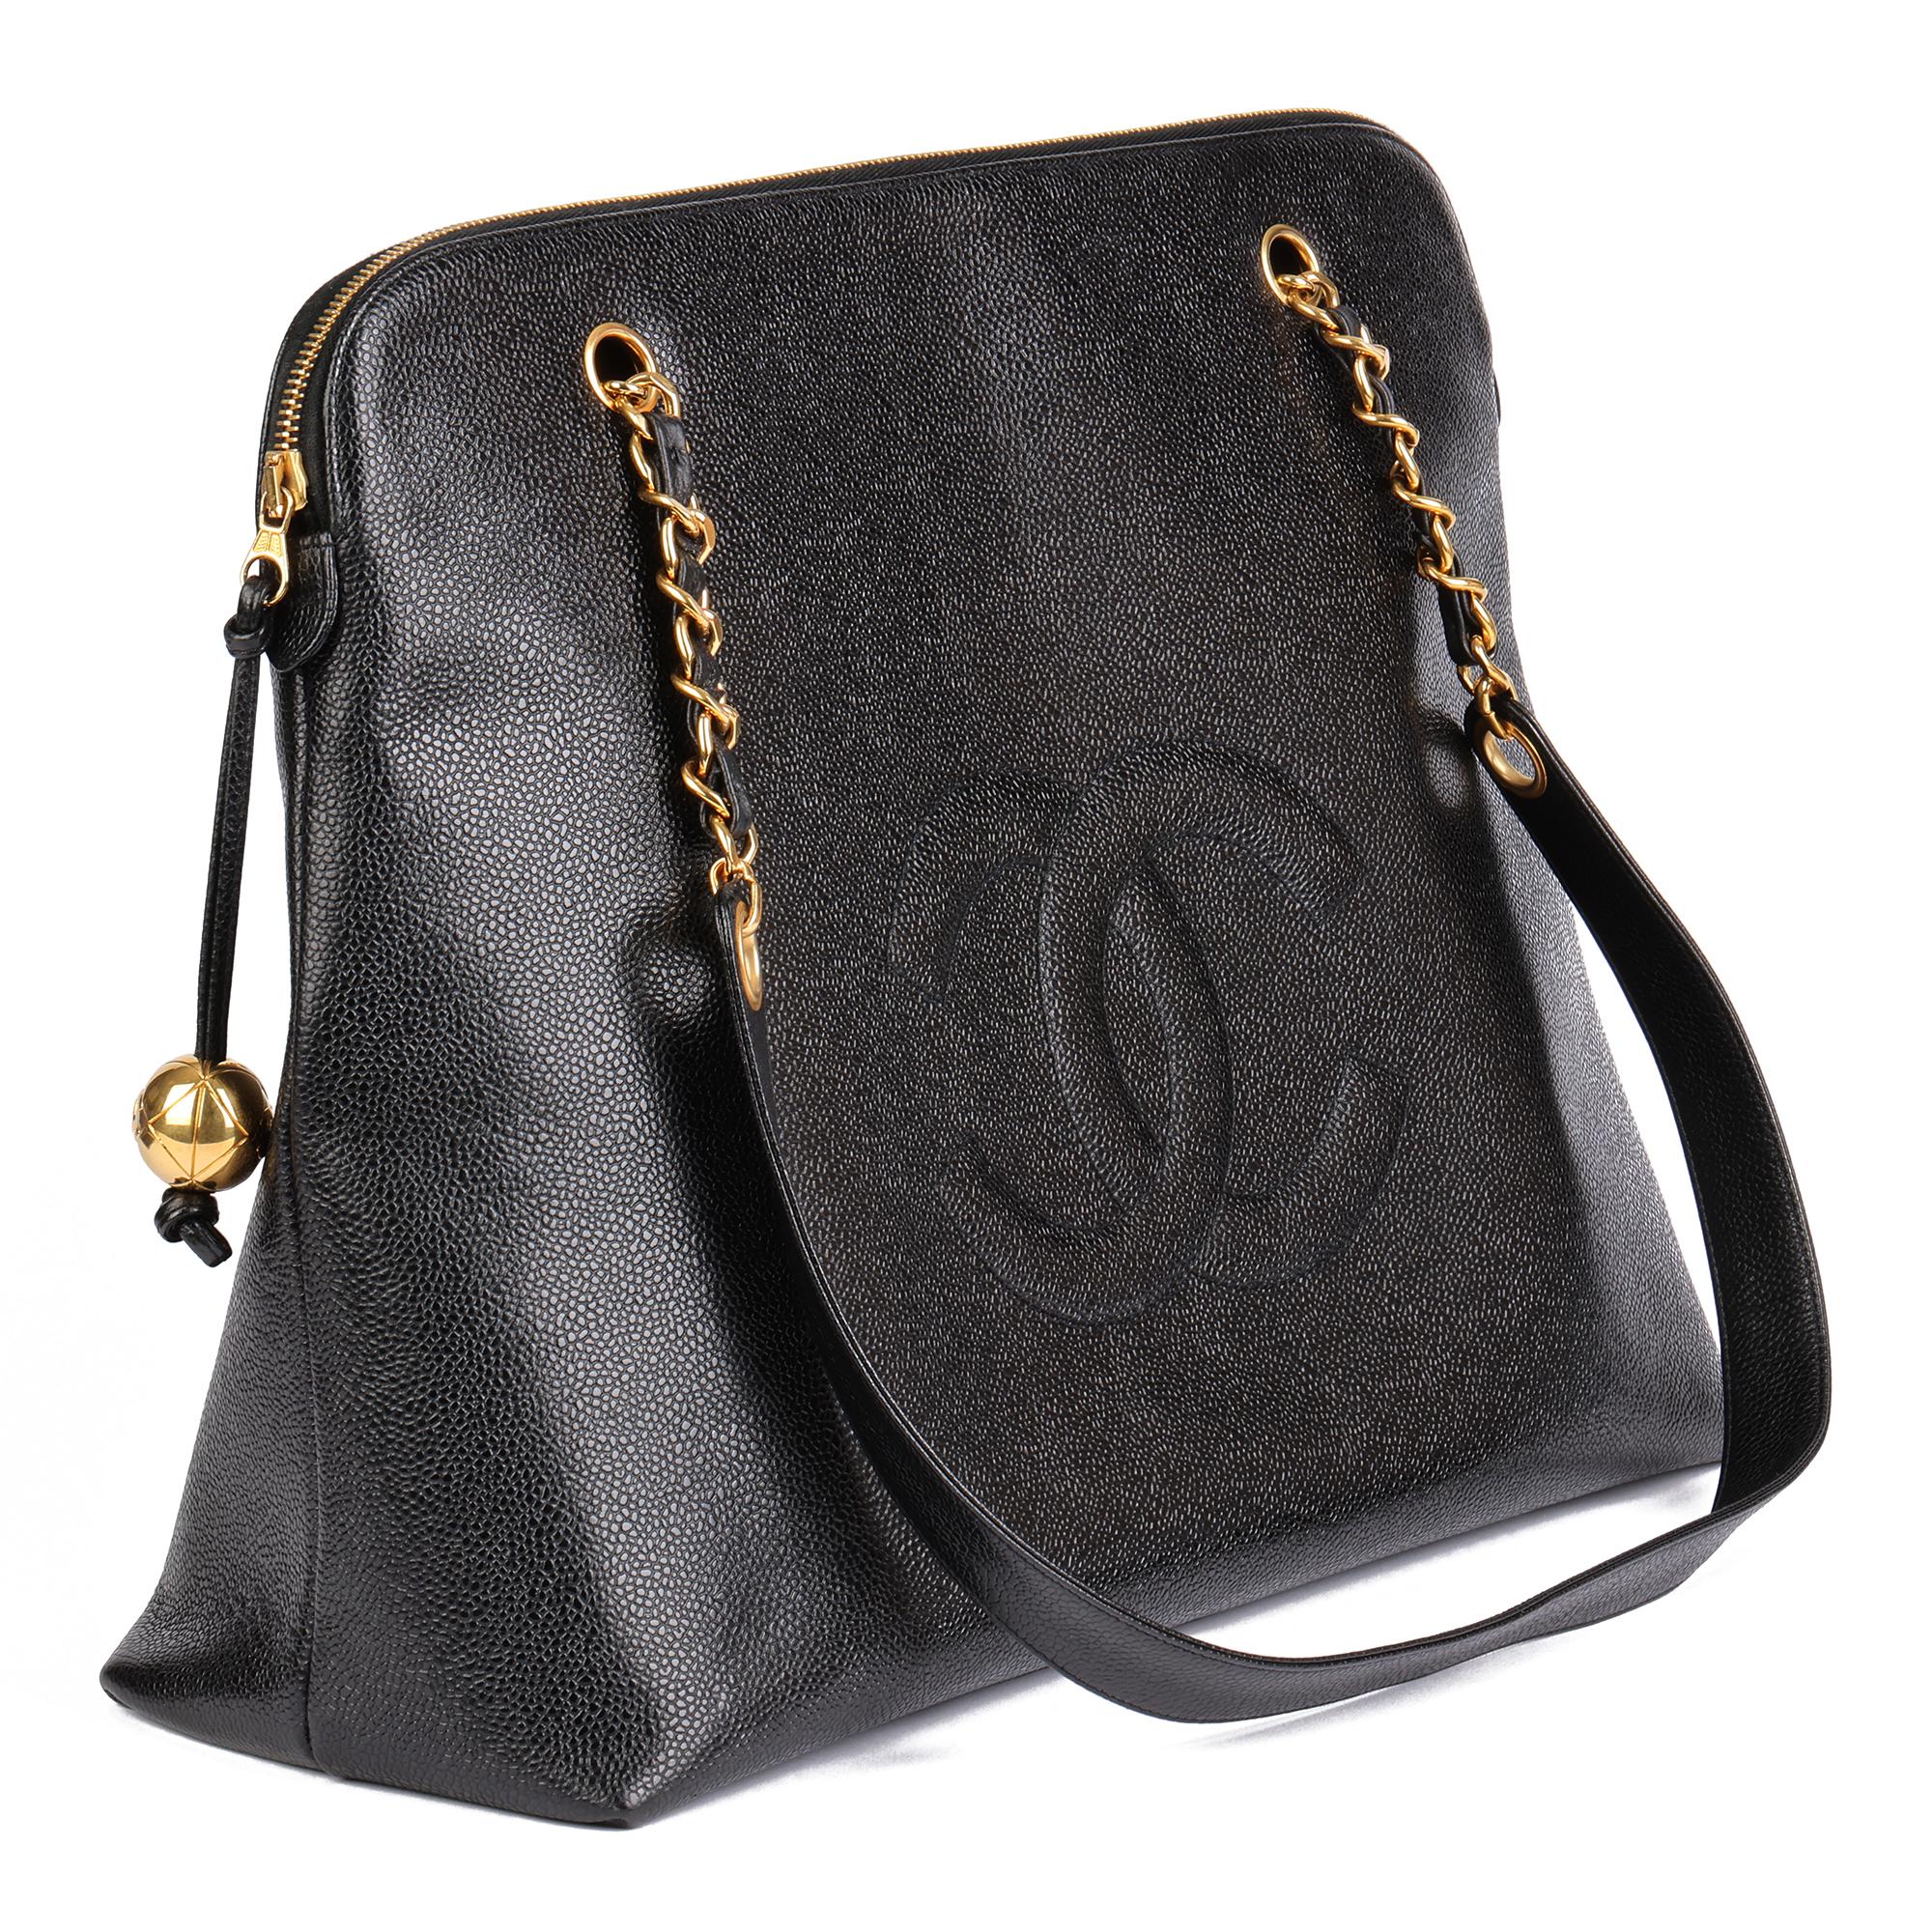 CHANEL
Black Caviar Leather Vintage Timeless Shoulder Bag

Xupes Reference: HB4682
Serial Number: 3536761
Age (Circa): 1996
Accompanied By: Care Booklet, Authenticity Card
Authenticity Details: Authenticity Card, Serial Sticker (Made in